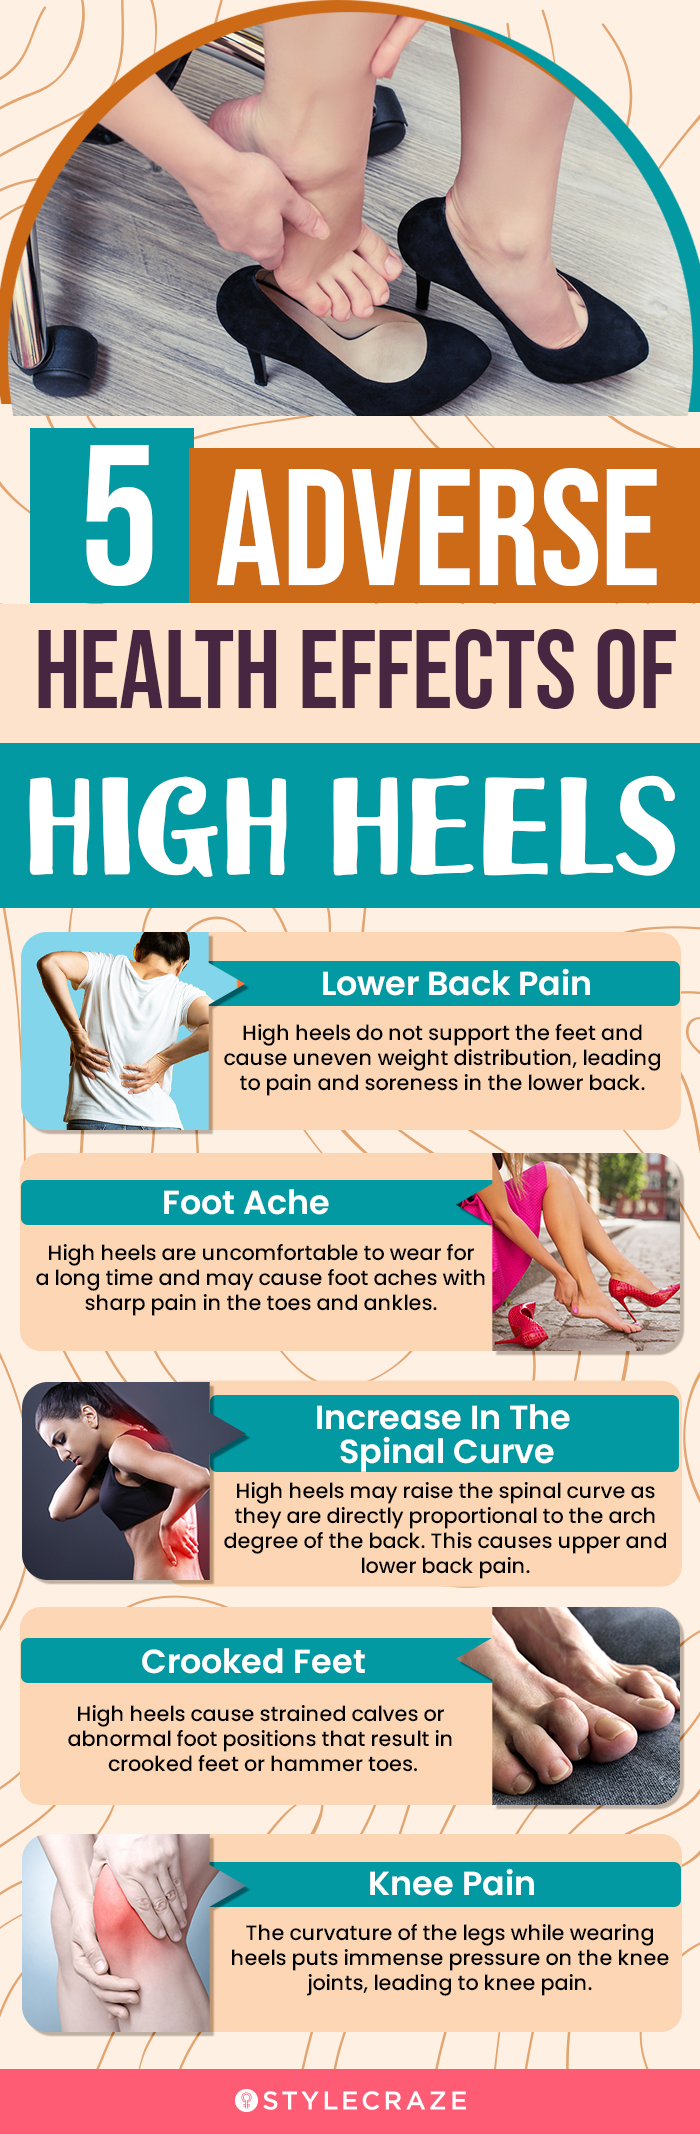 5 adverse health effects of high heels (infographic)